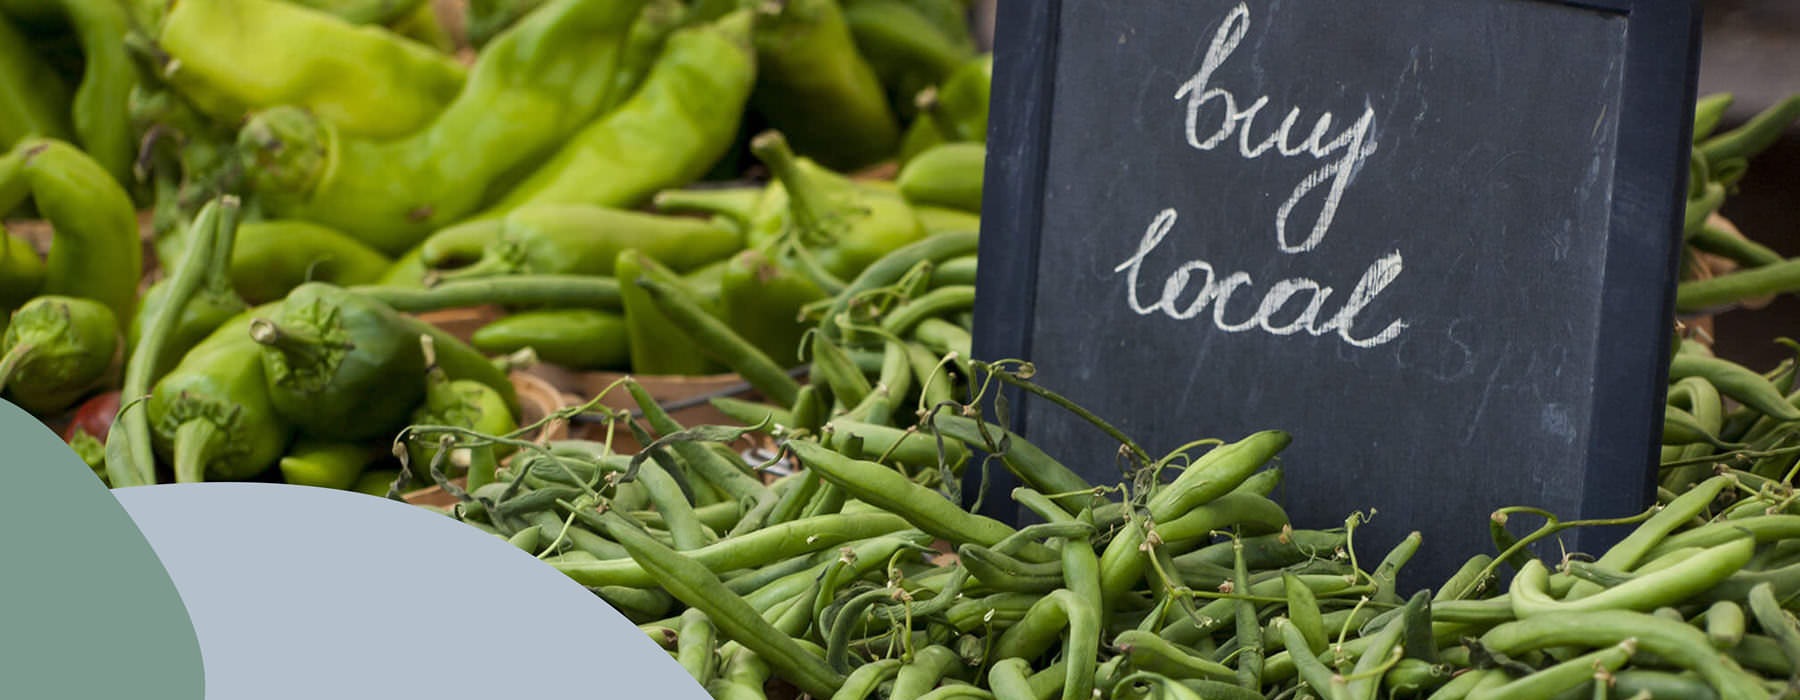 Green Beans And Chilis At Farmer's Market By Chalkbaord Sign That Reads "Buy Local"